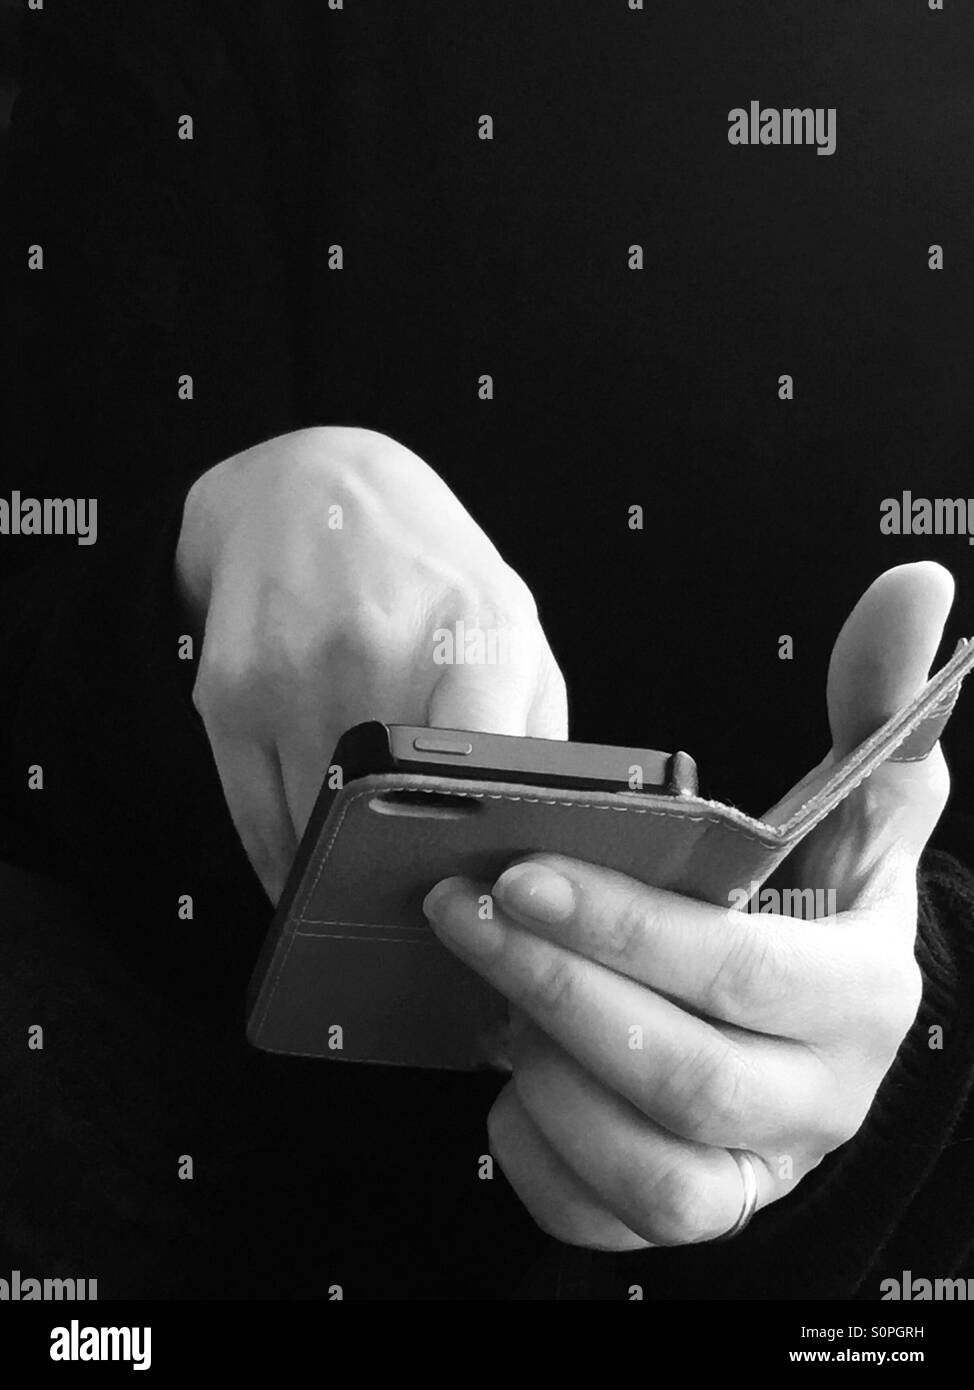 Closeup of the hands of a woman using a smartphone Stock Photo